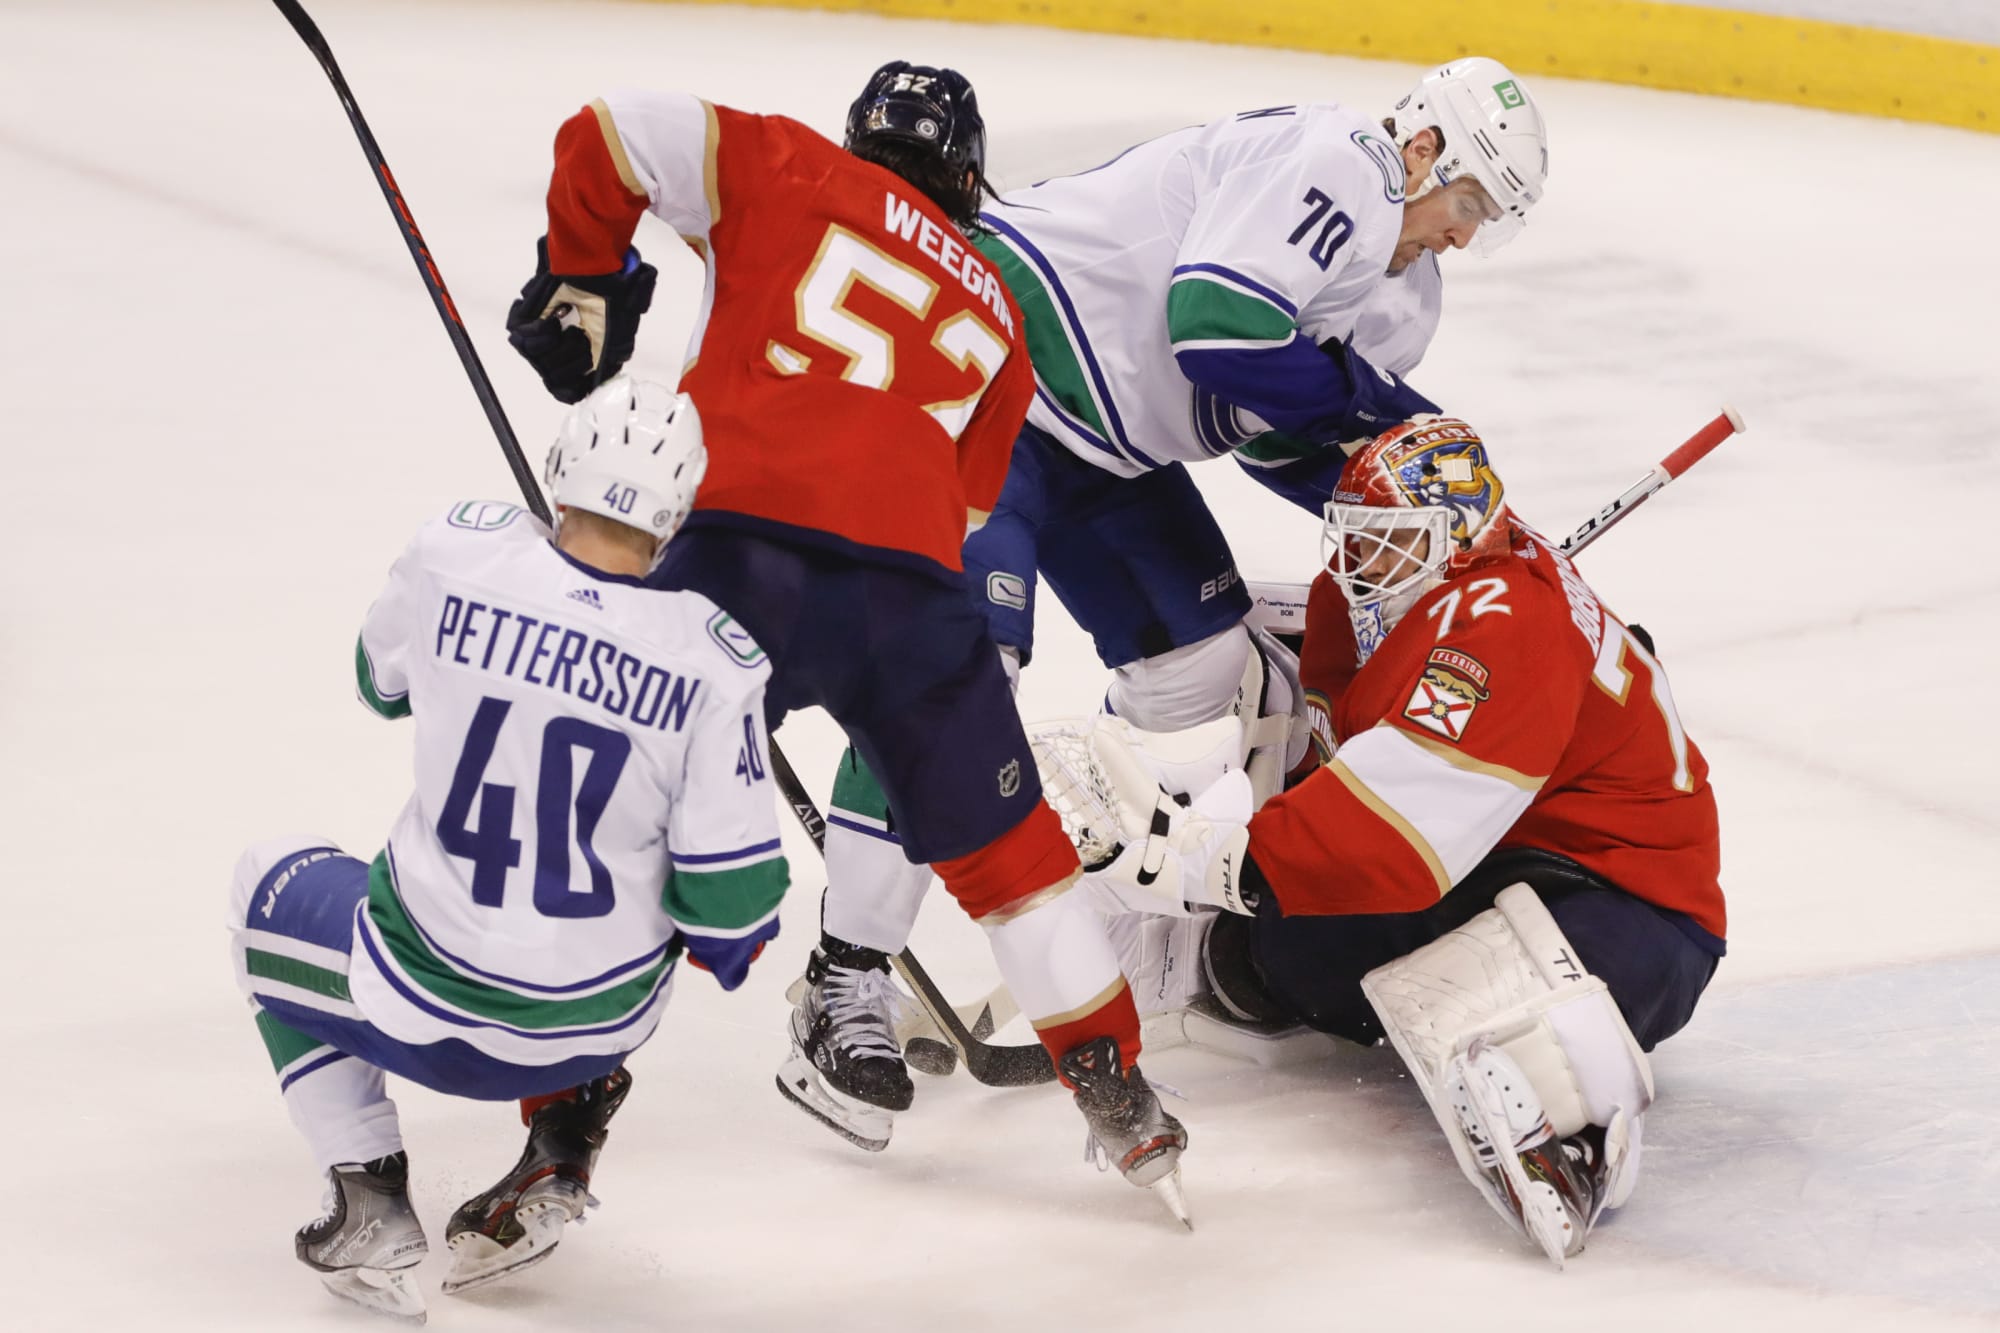 Canucks lose to the Panthers with resiliency, not by relinquishing 